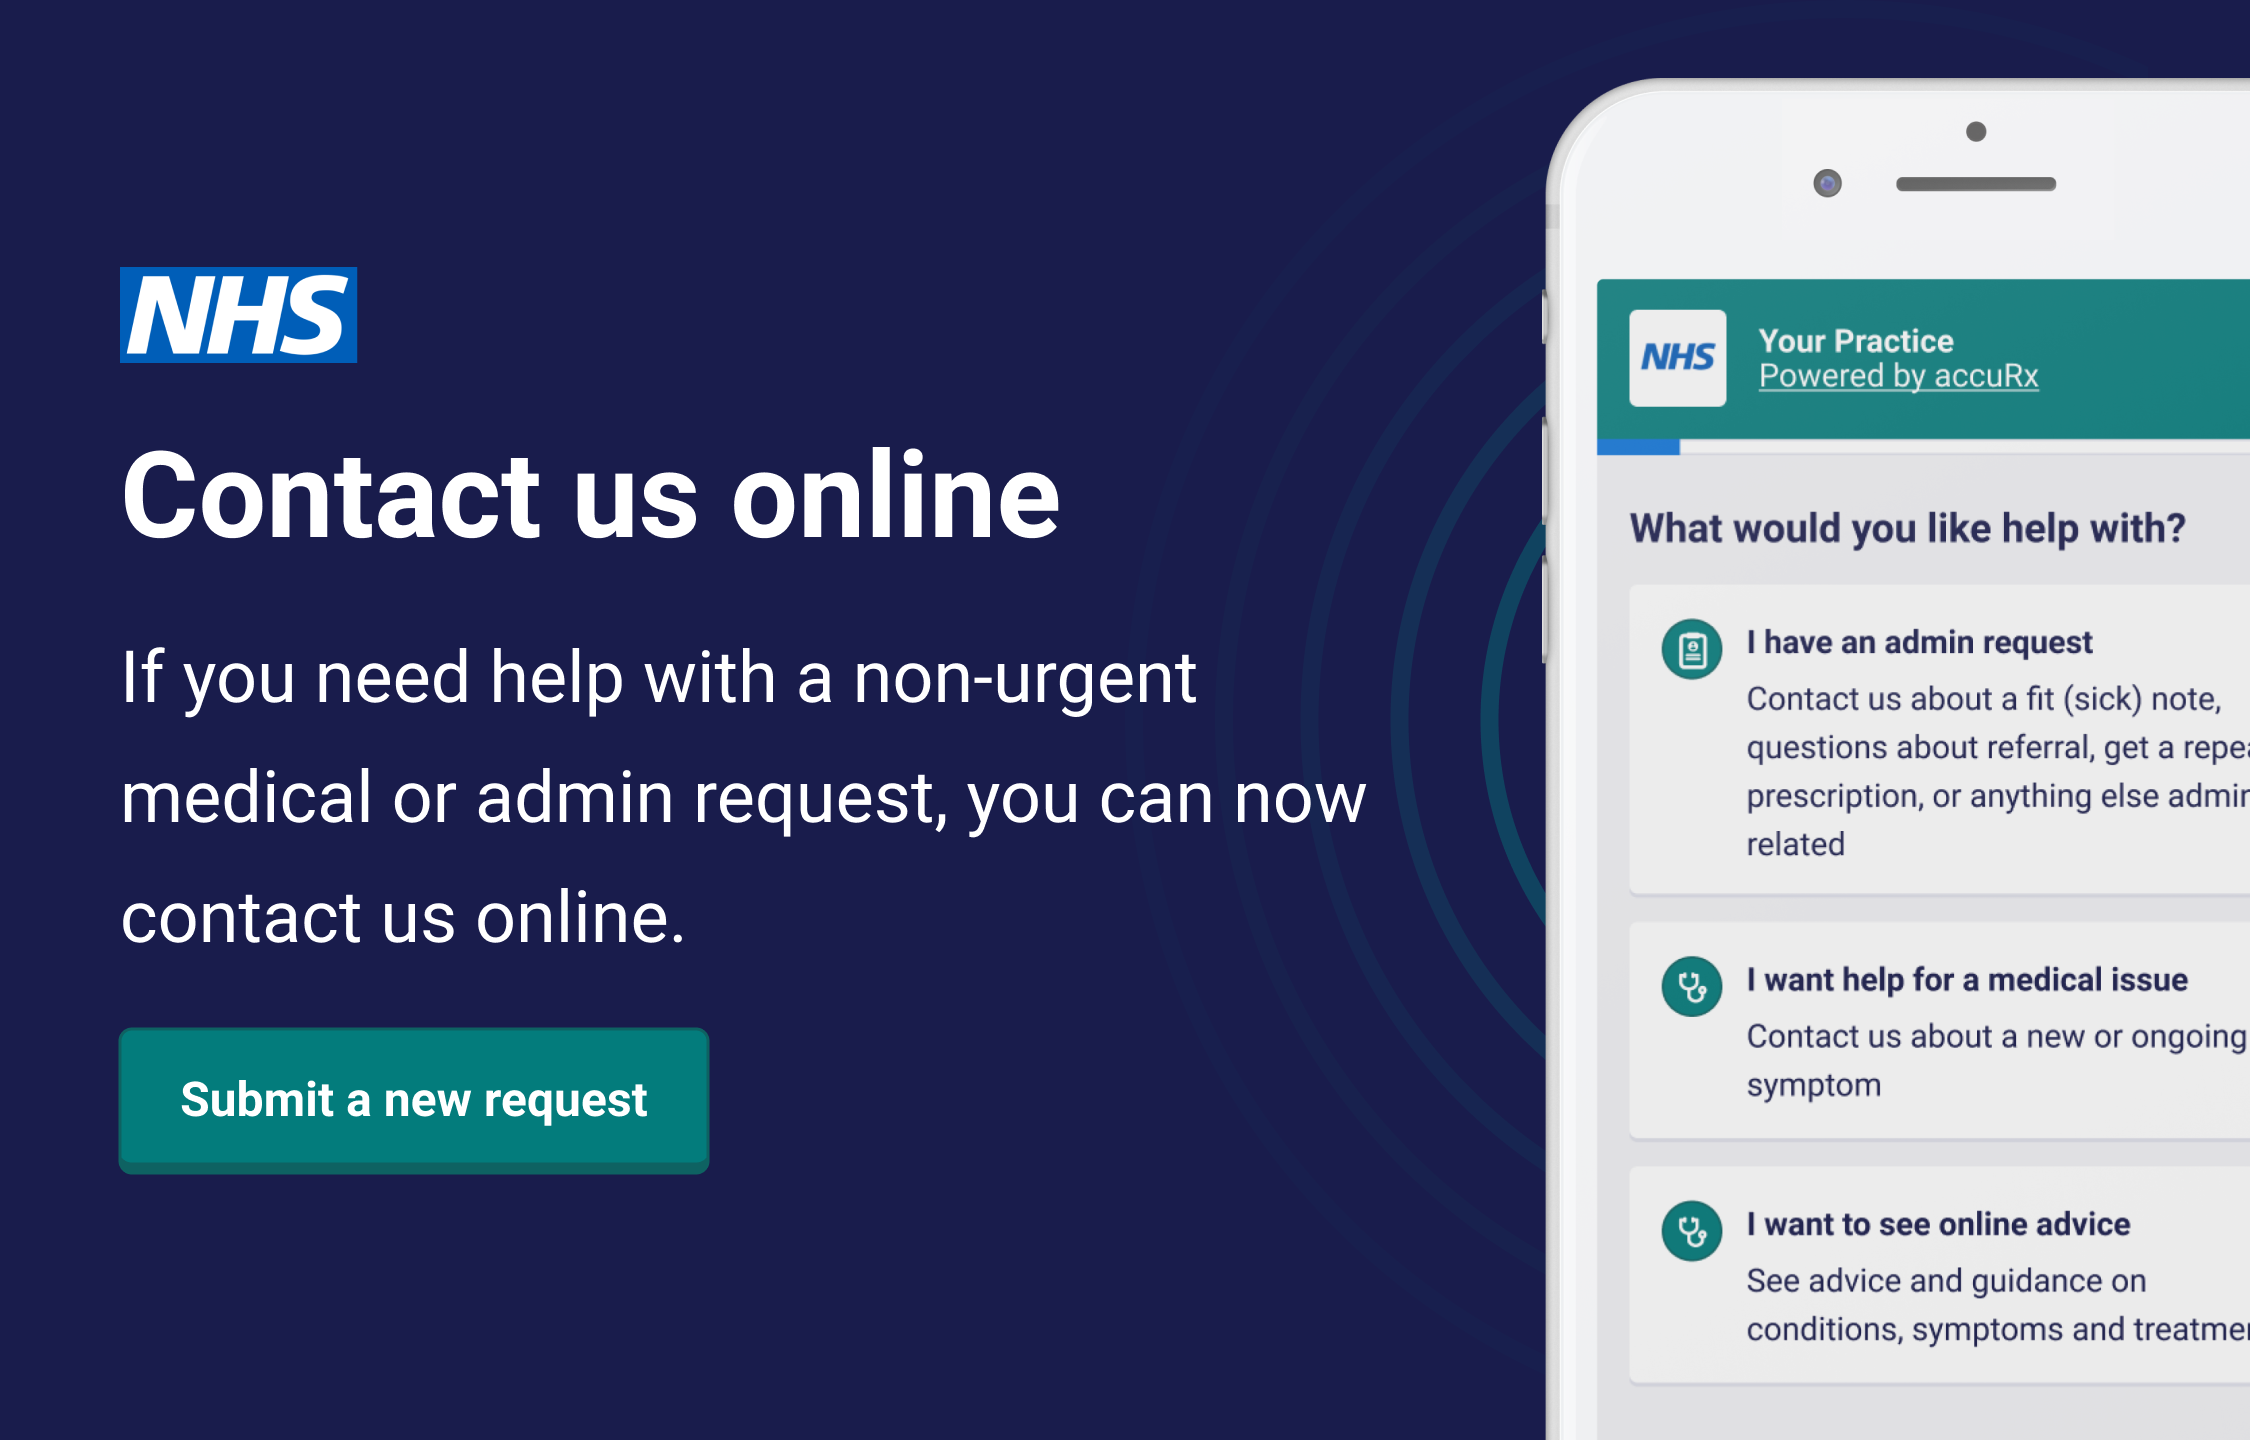 Contact us online for help with a non-urgent medical or admin request